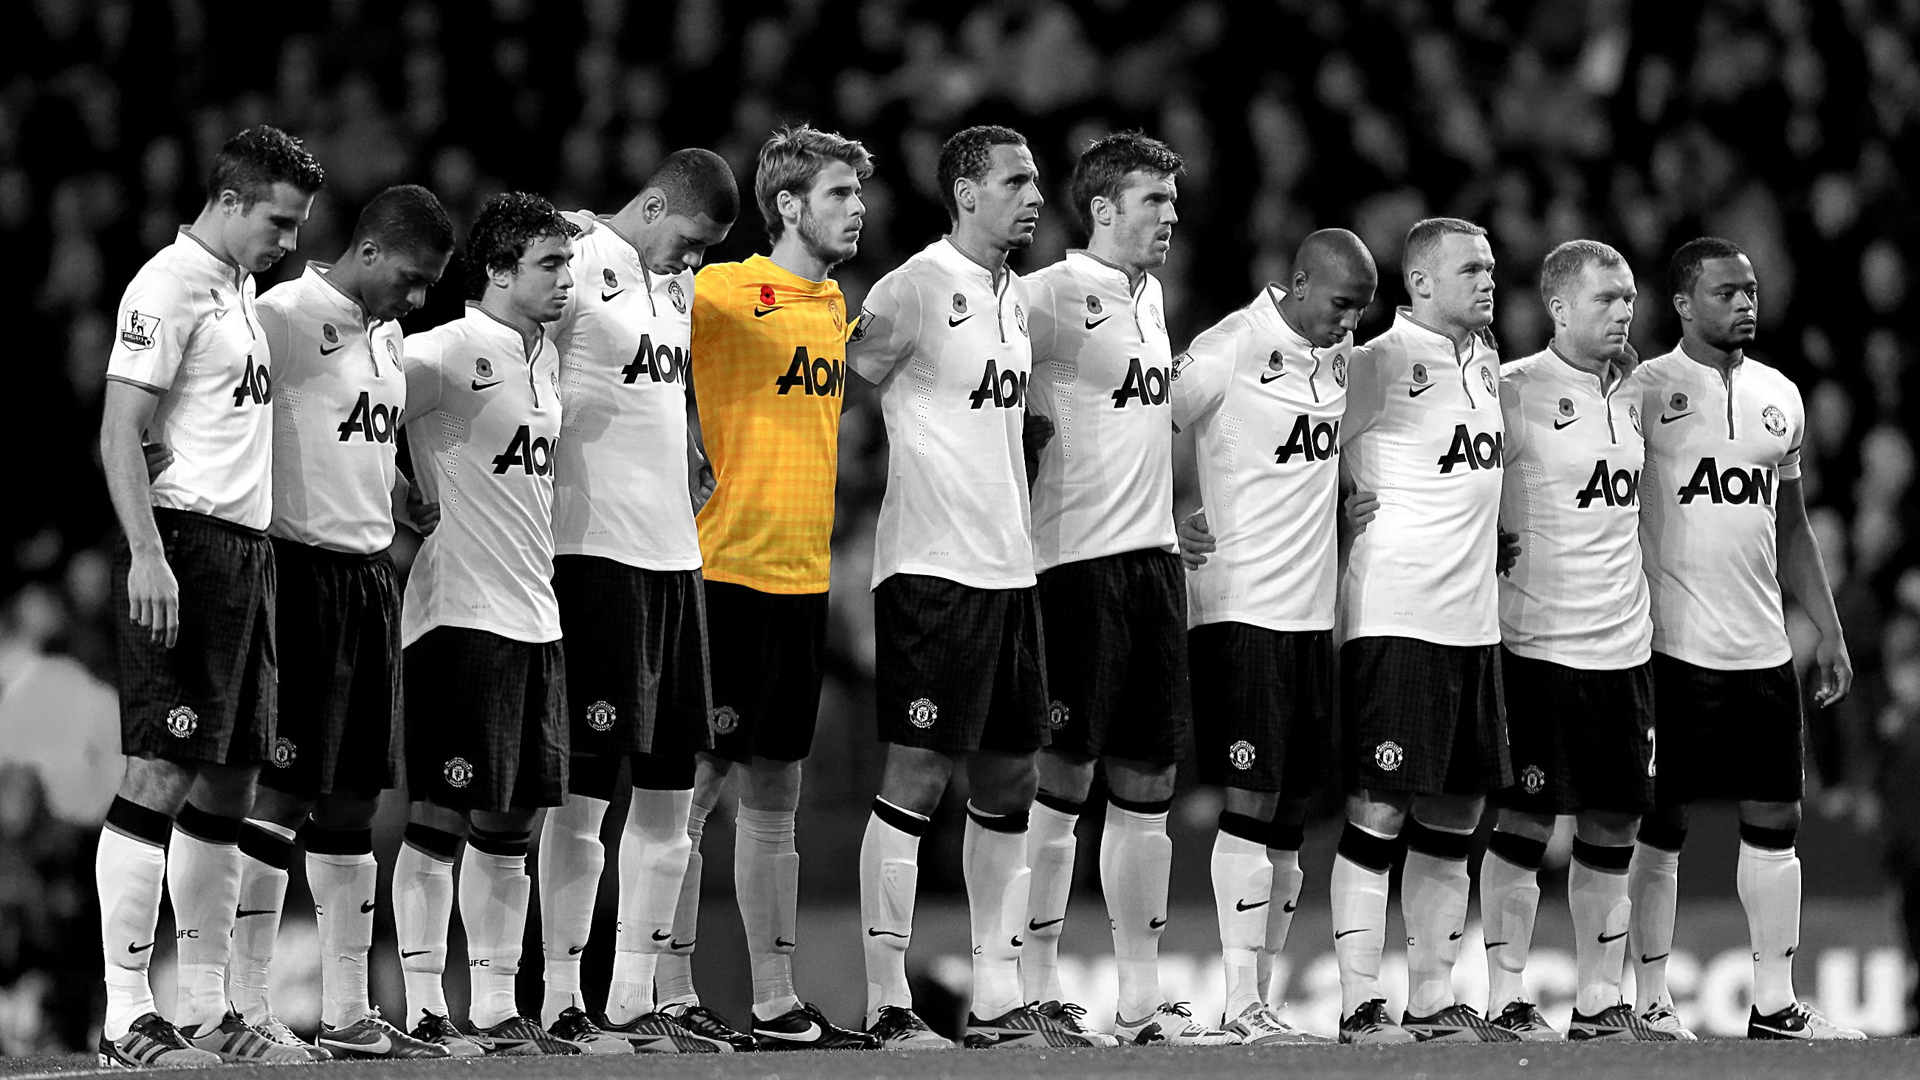 Black and White Team Photo with Contrast of De Gea ...